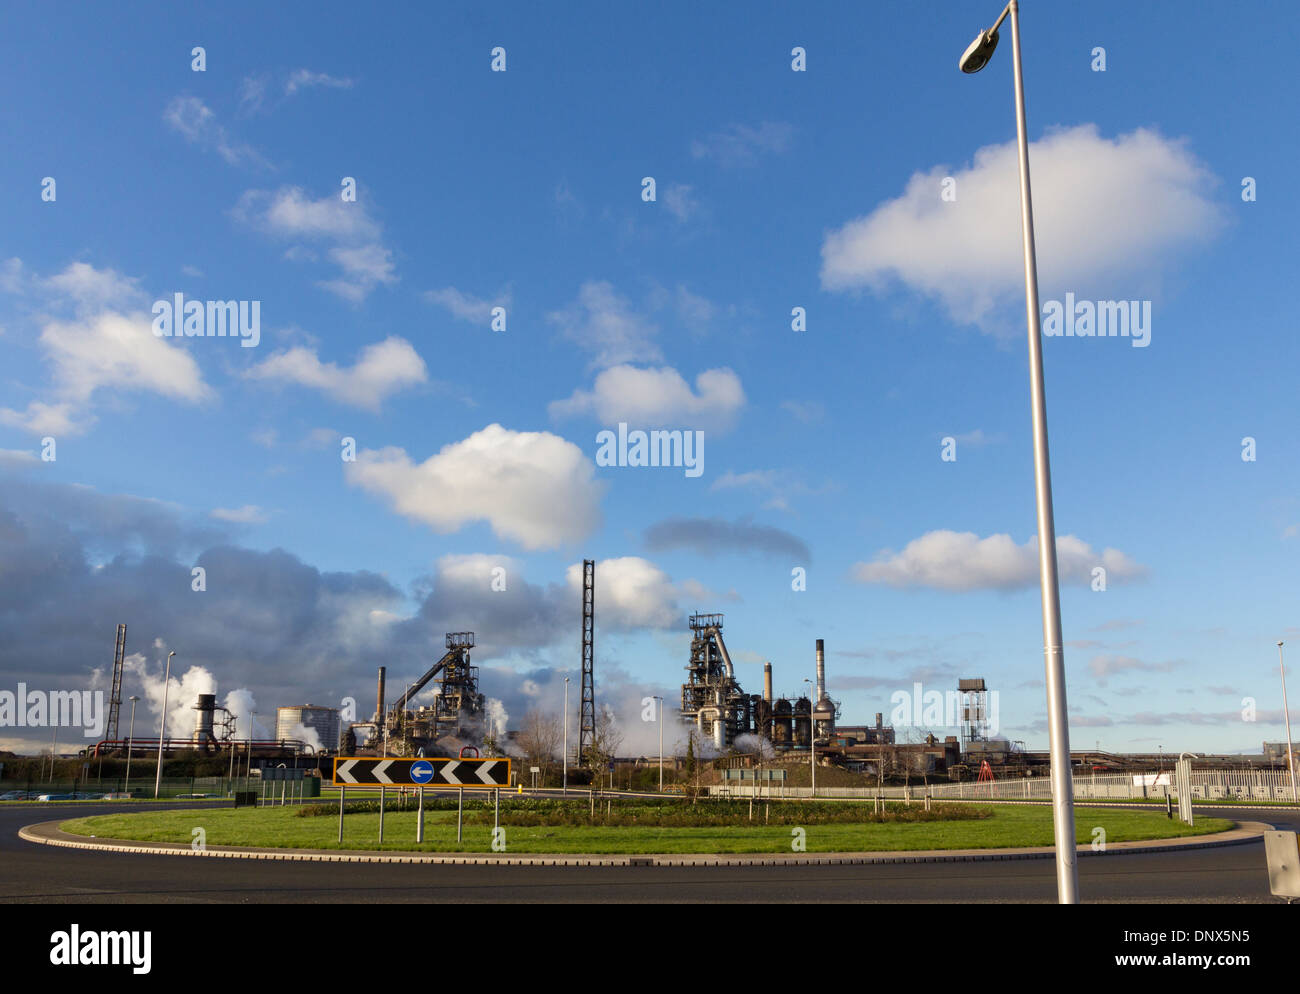 Port Talbot, Wales, UK - 20 November 2013: Port Talbot steelworks, West Glamorgan, Wales and the new A4241 Harbour Way Road Stock Photo